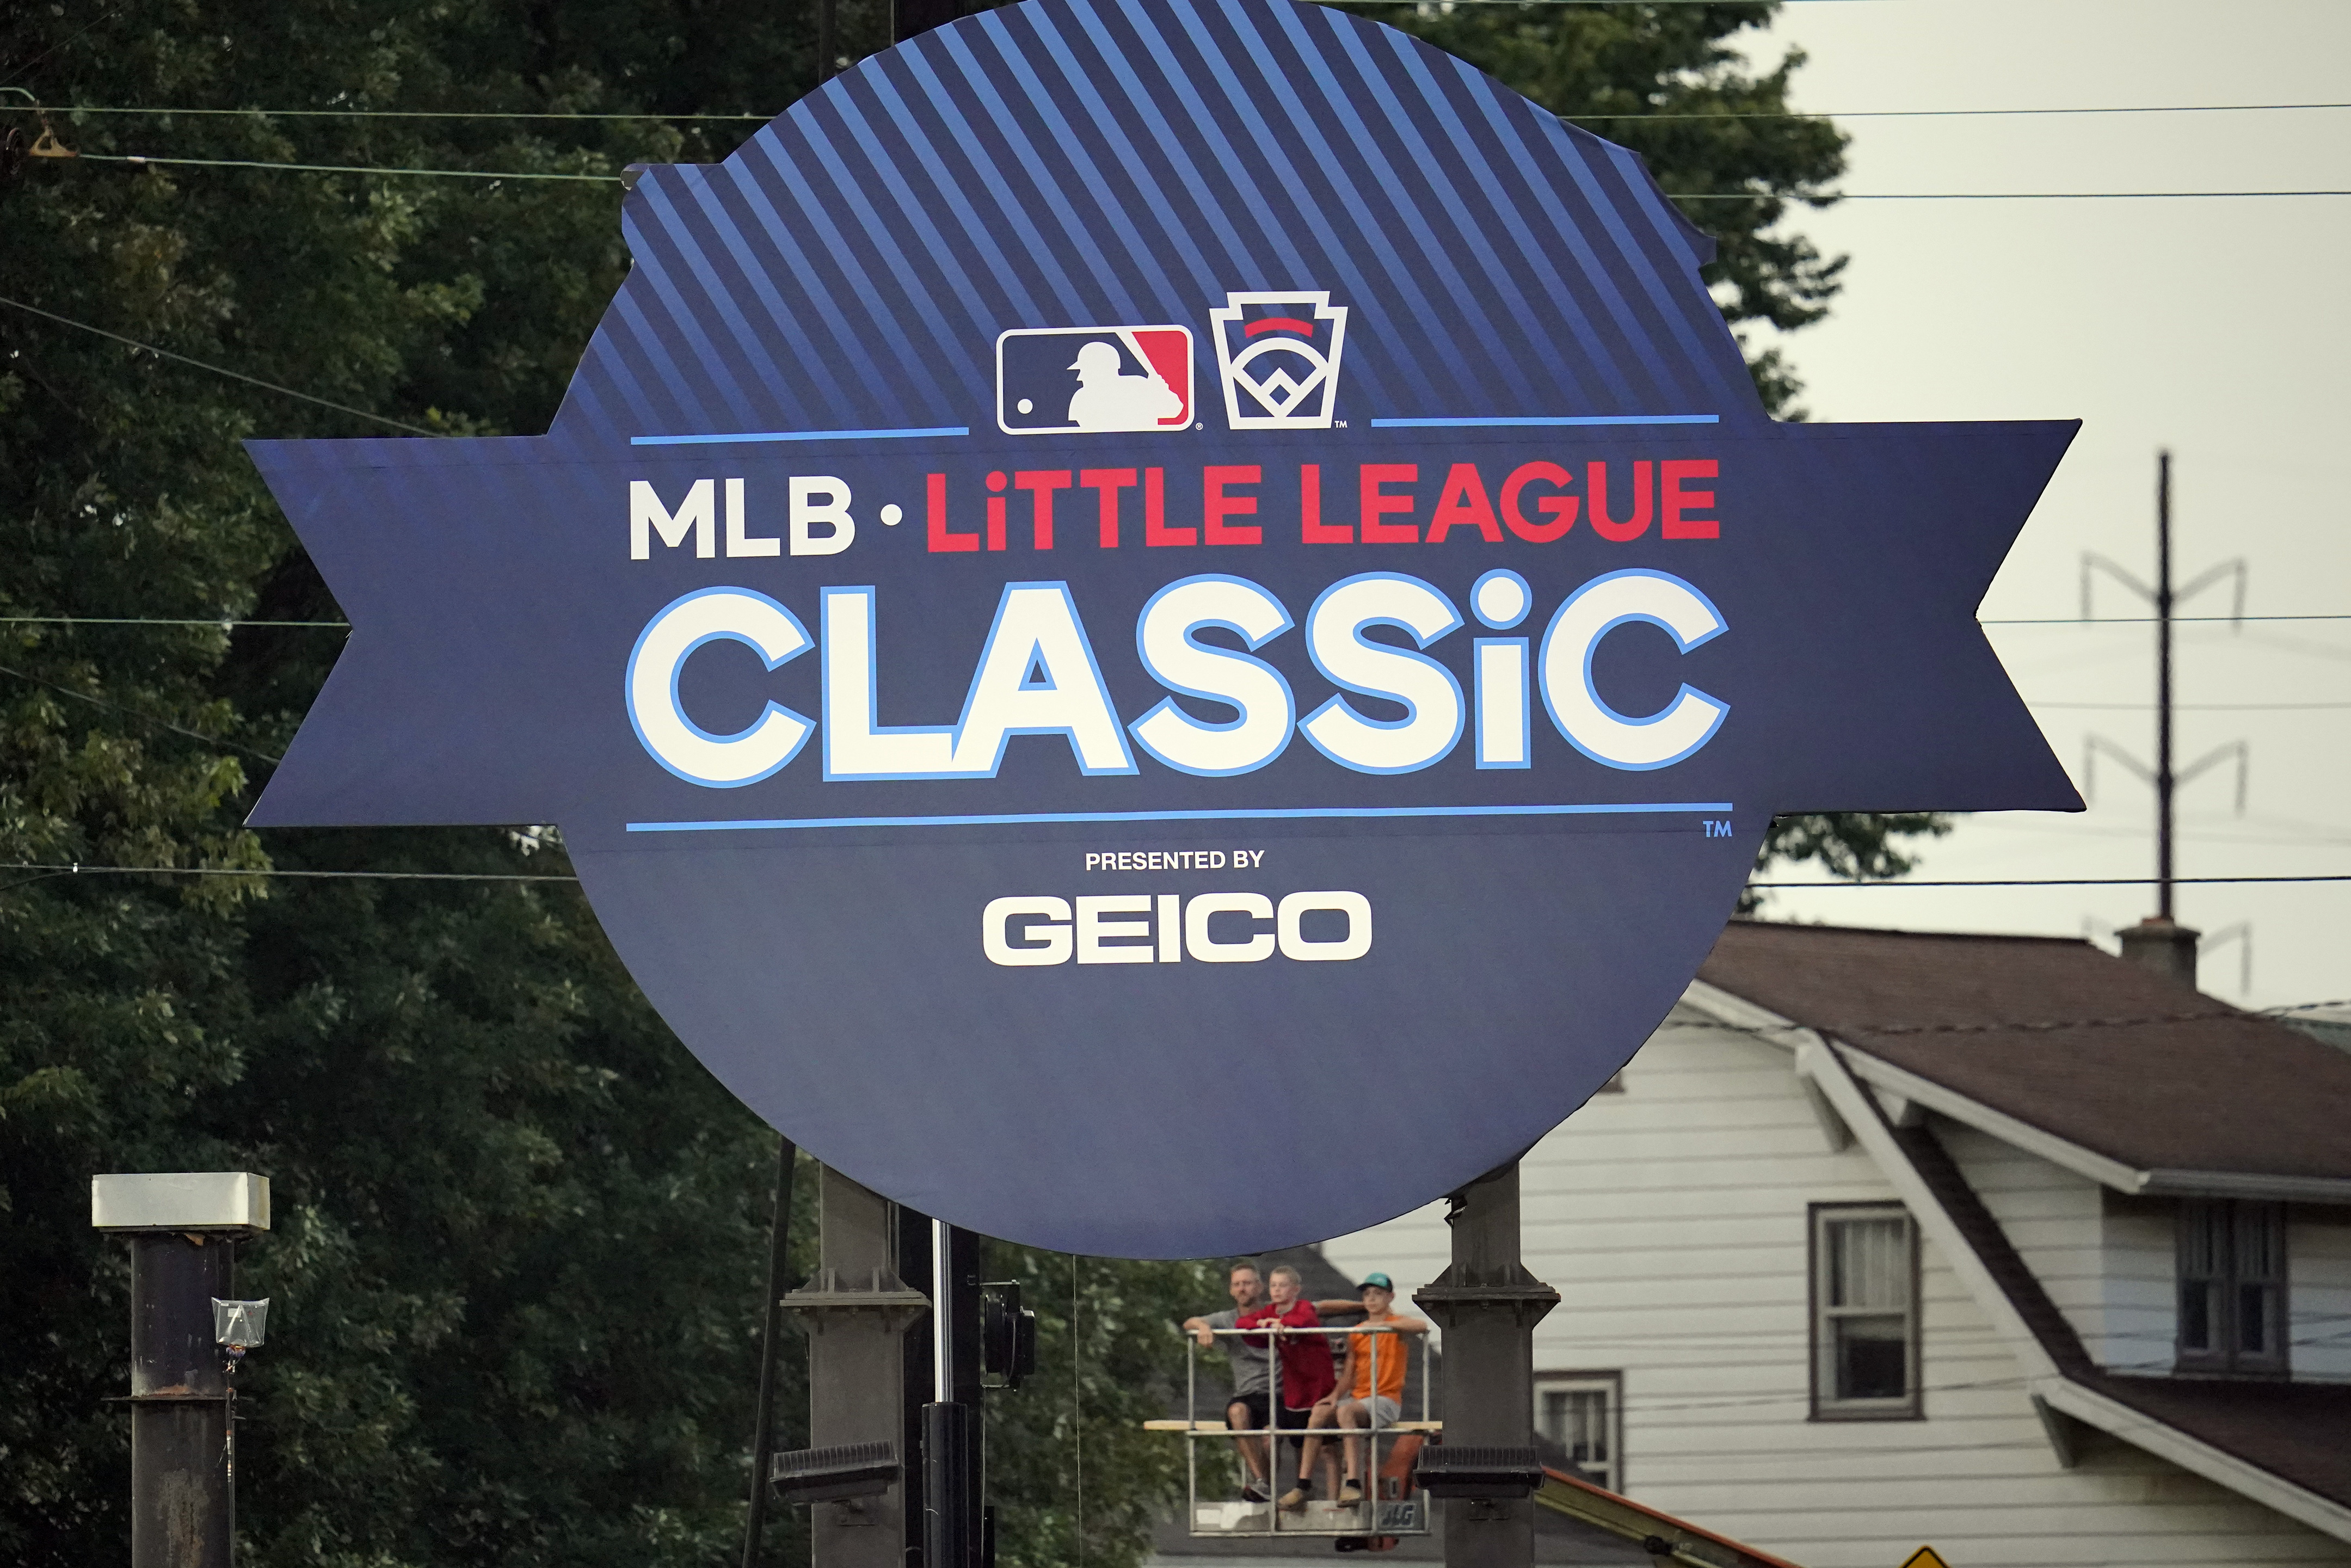 Orioles vs. Red Sox at the 2022 MLB Little League Classic